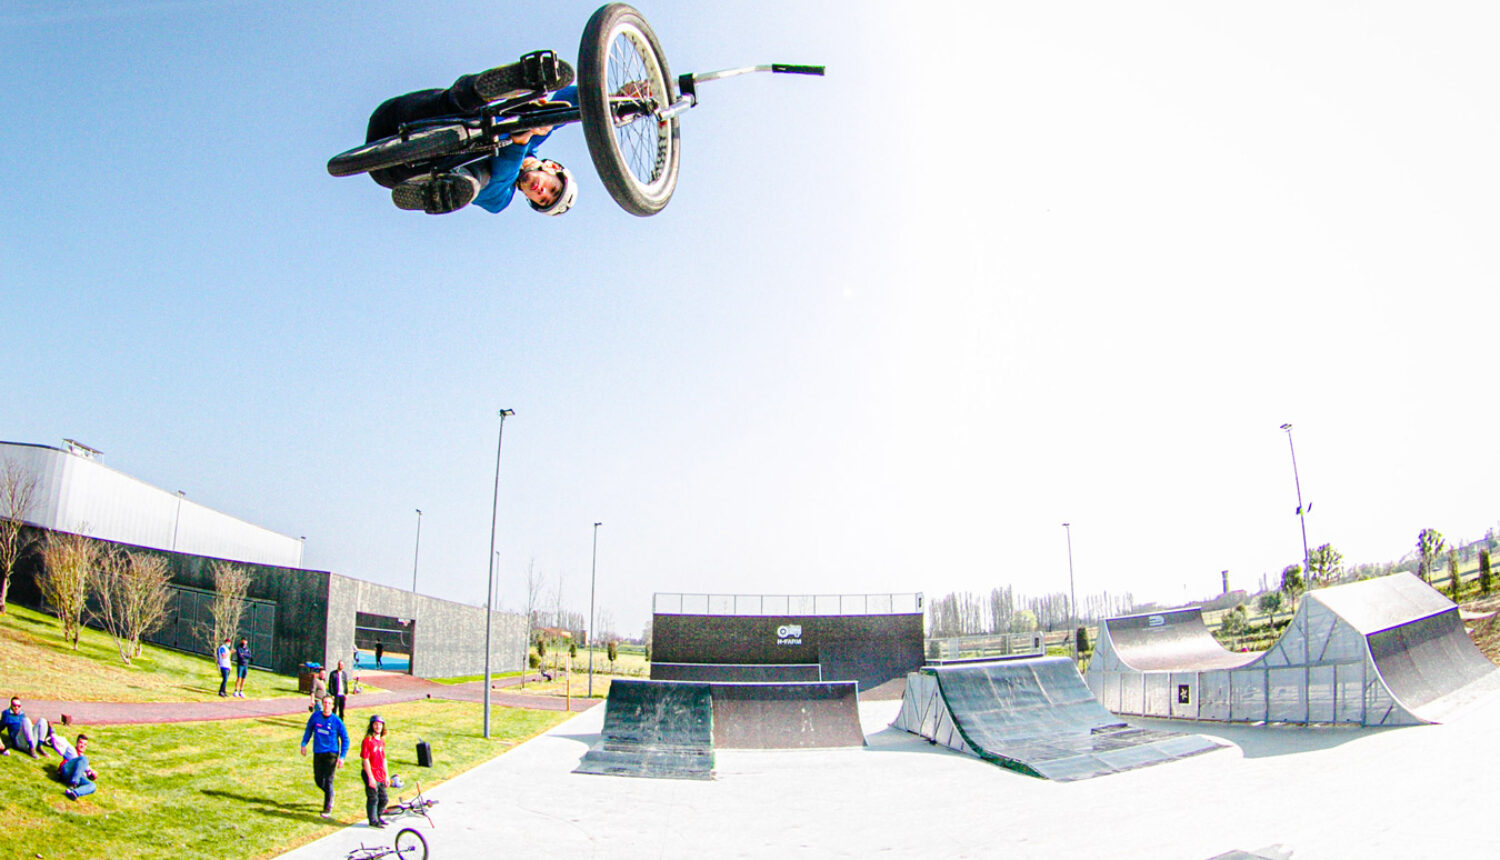 Our new Olympic park inaugurated by the Italian BMX national team